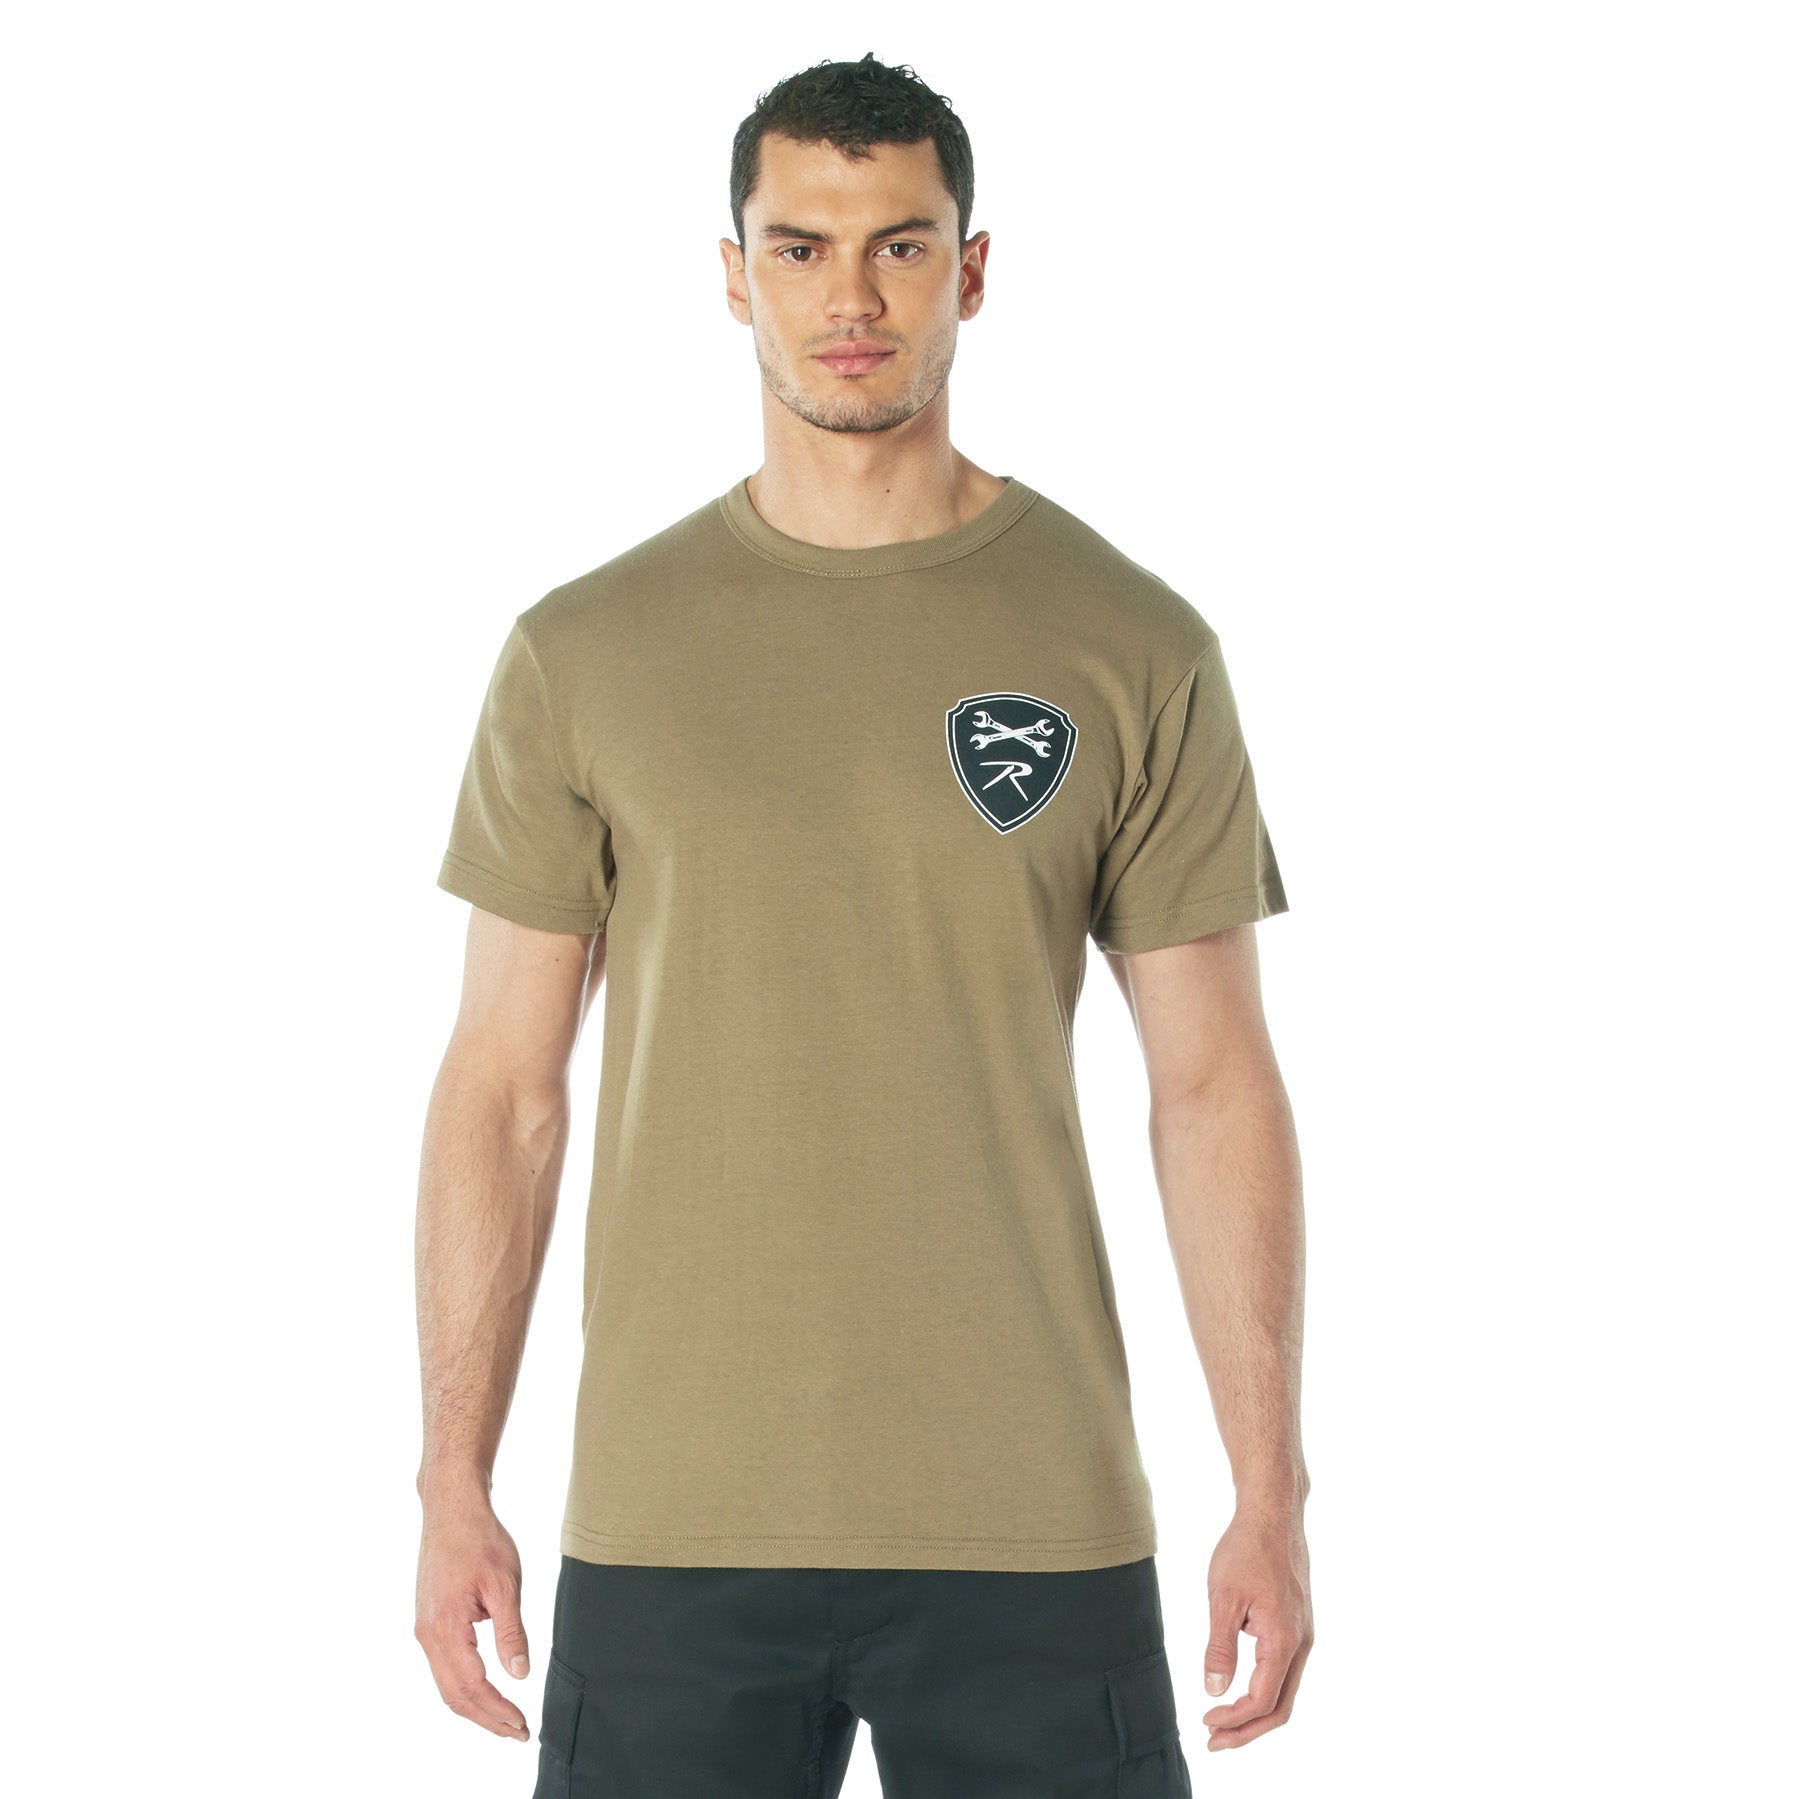 Rothco Getting The Job Done T-Shirt - Tactical Choice Plus